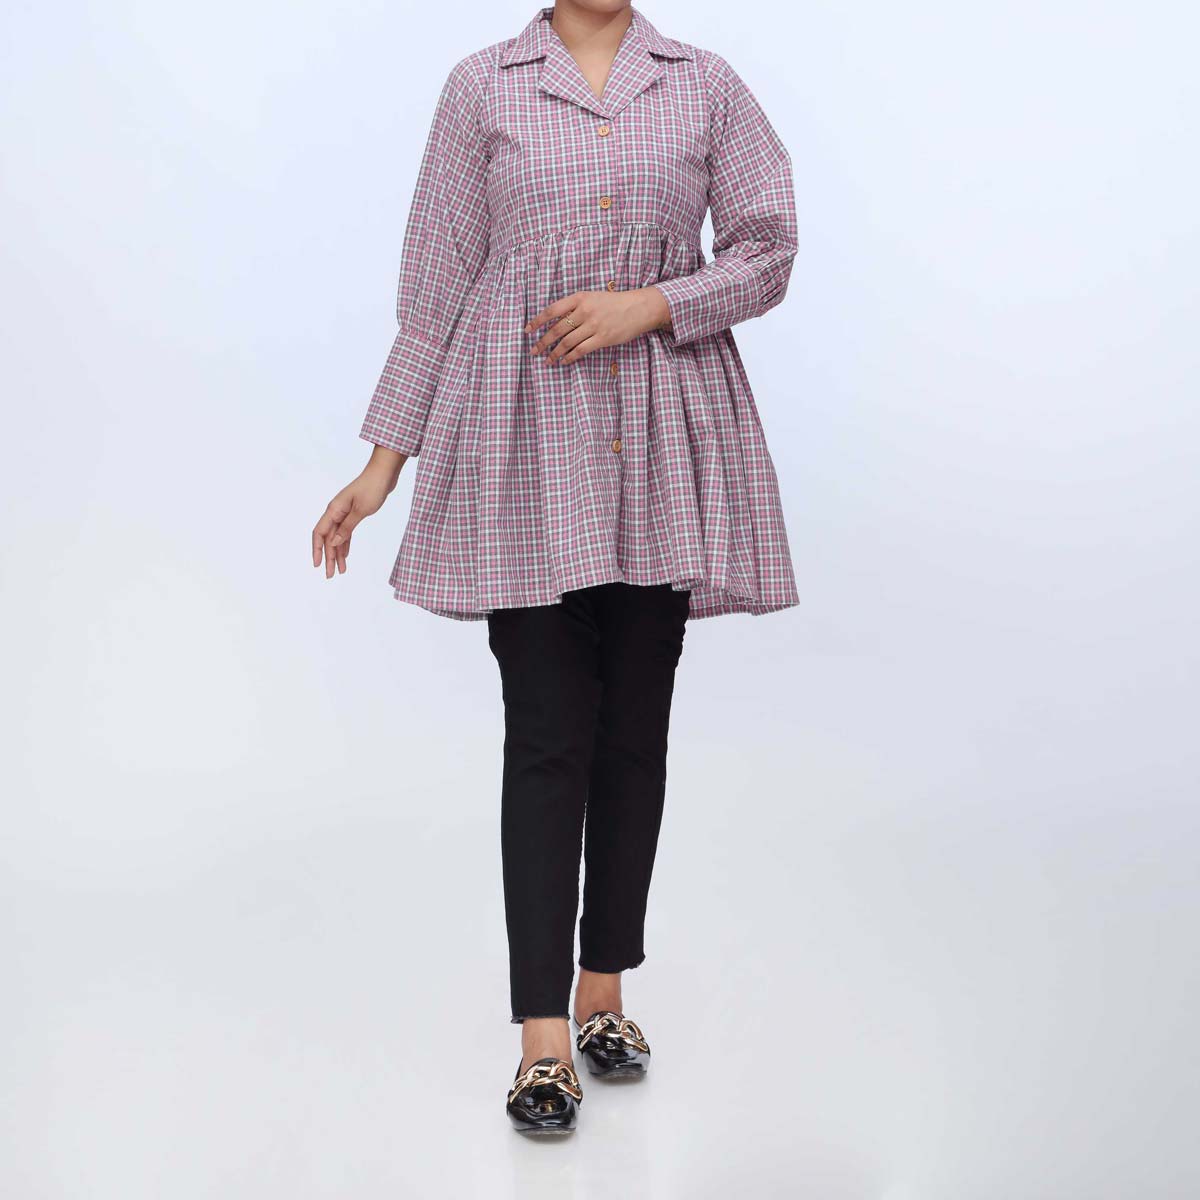 1PC-Flannel Checkered Top PW3086